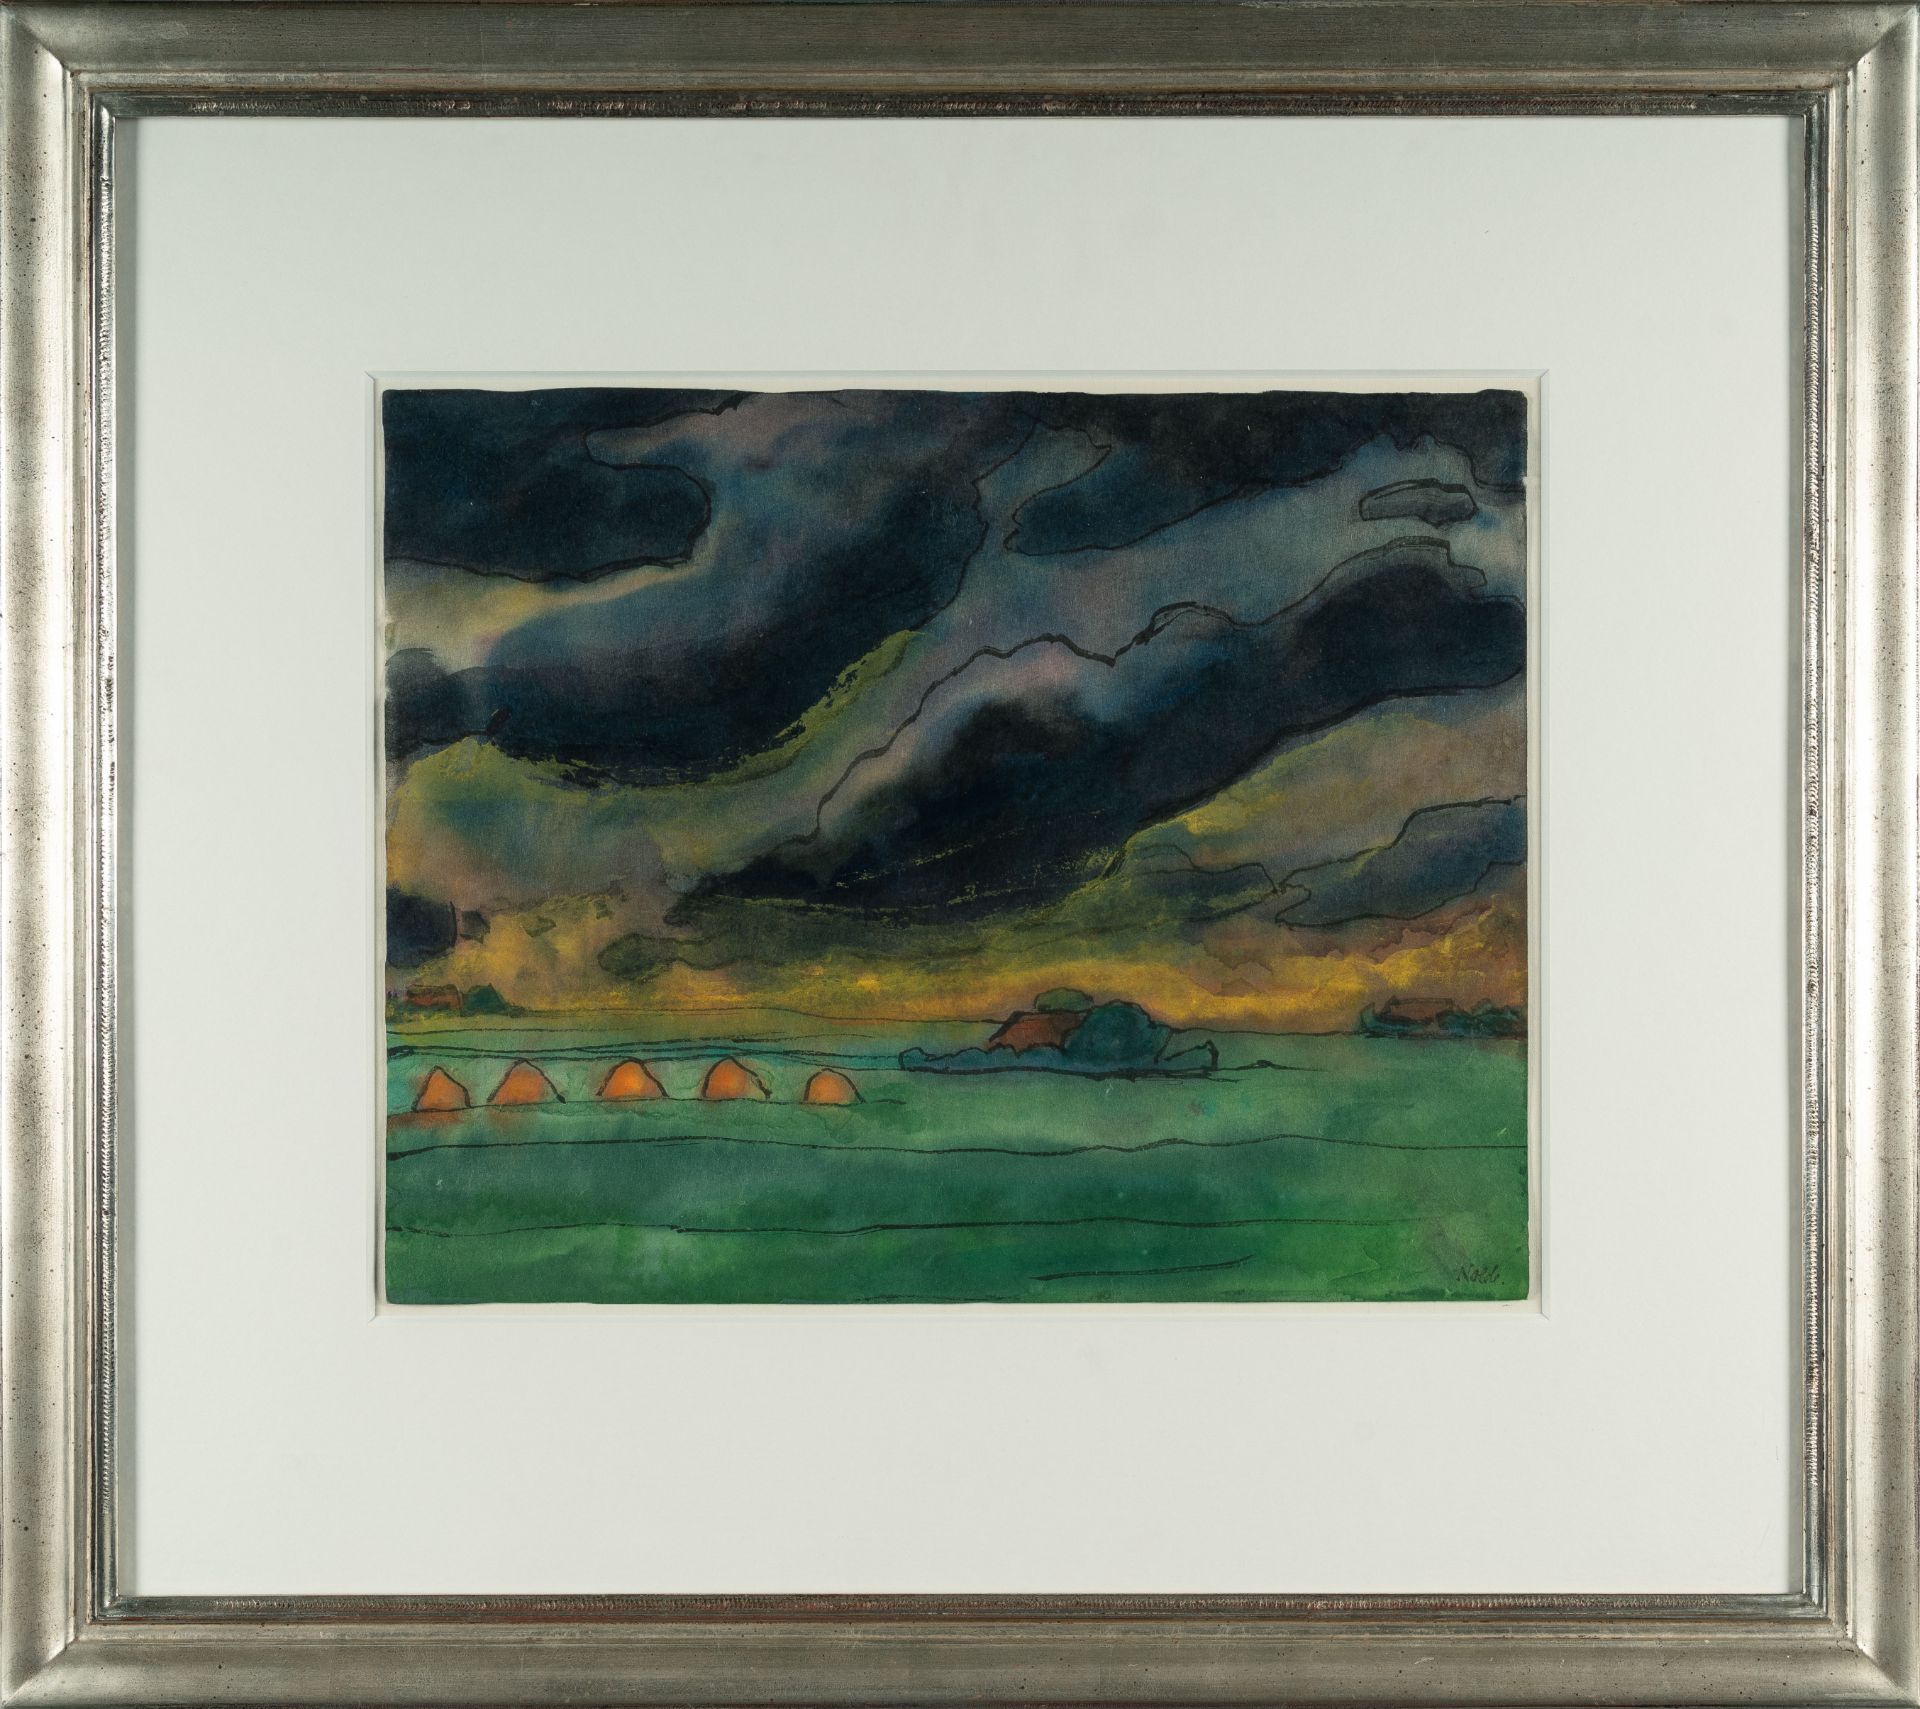 Emil Nolde (1867 Nolde - Seebüll 1956) – Marshland.Watercolour and pen and ink on Japon. (1949). - Image 4 of 5